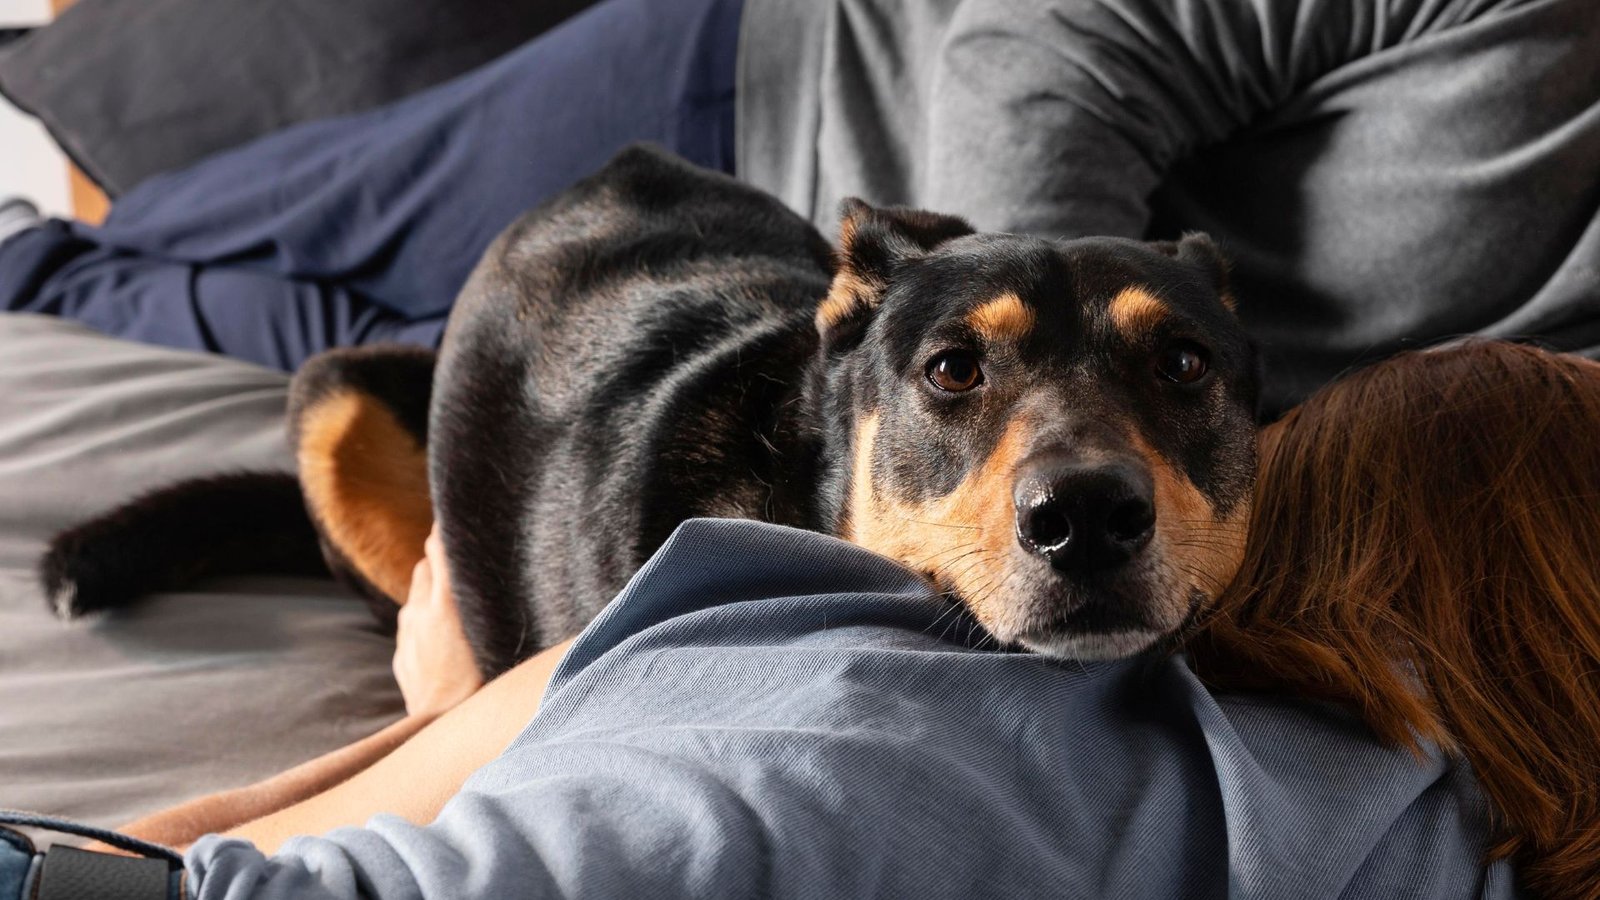 REASONS WHY YOUR DOG HAS A SEPARATION ANXIETY